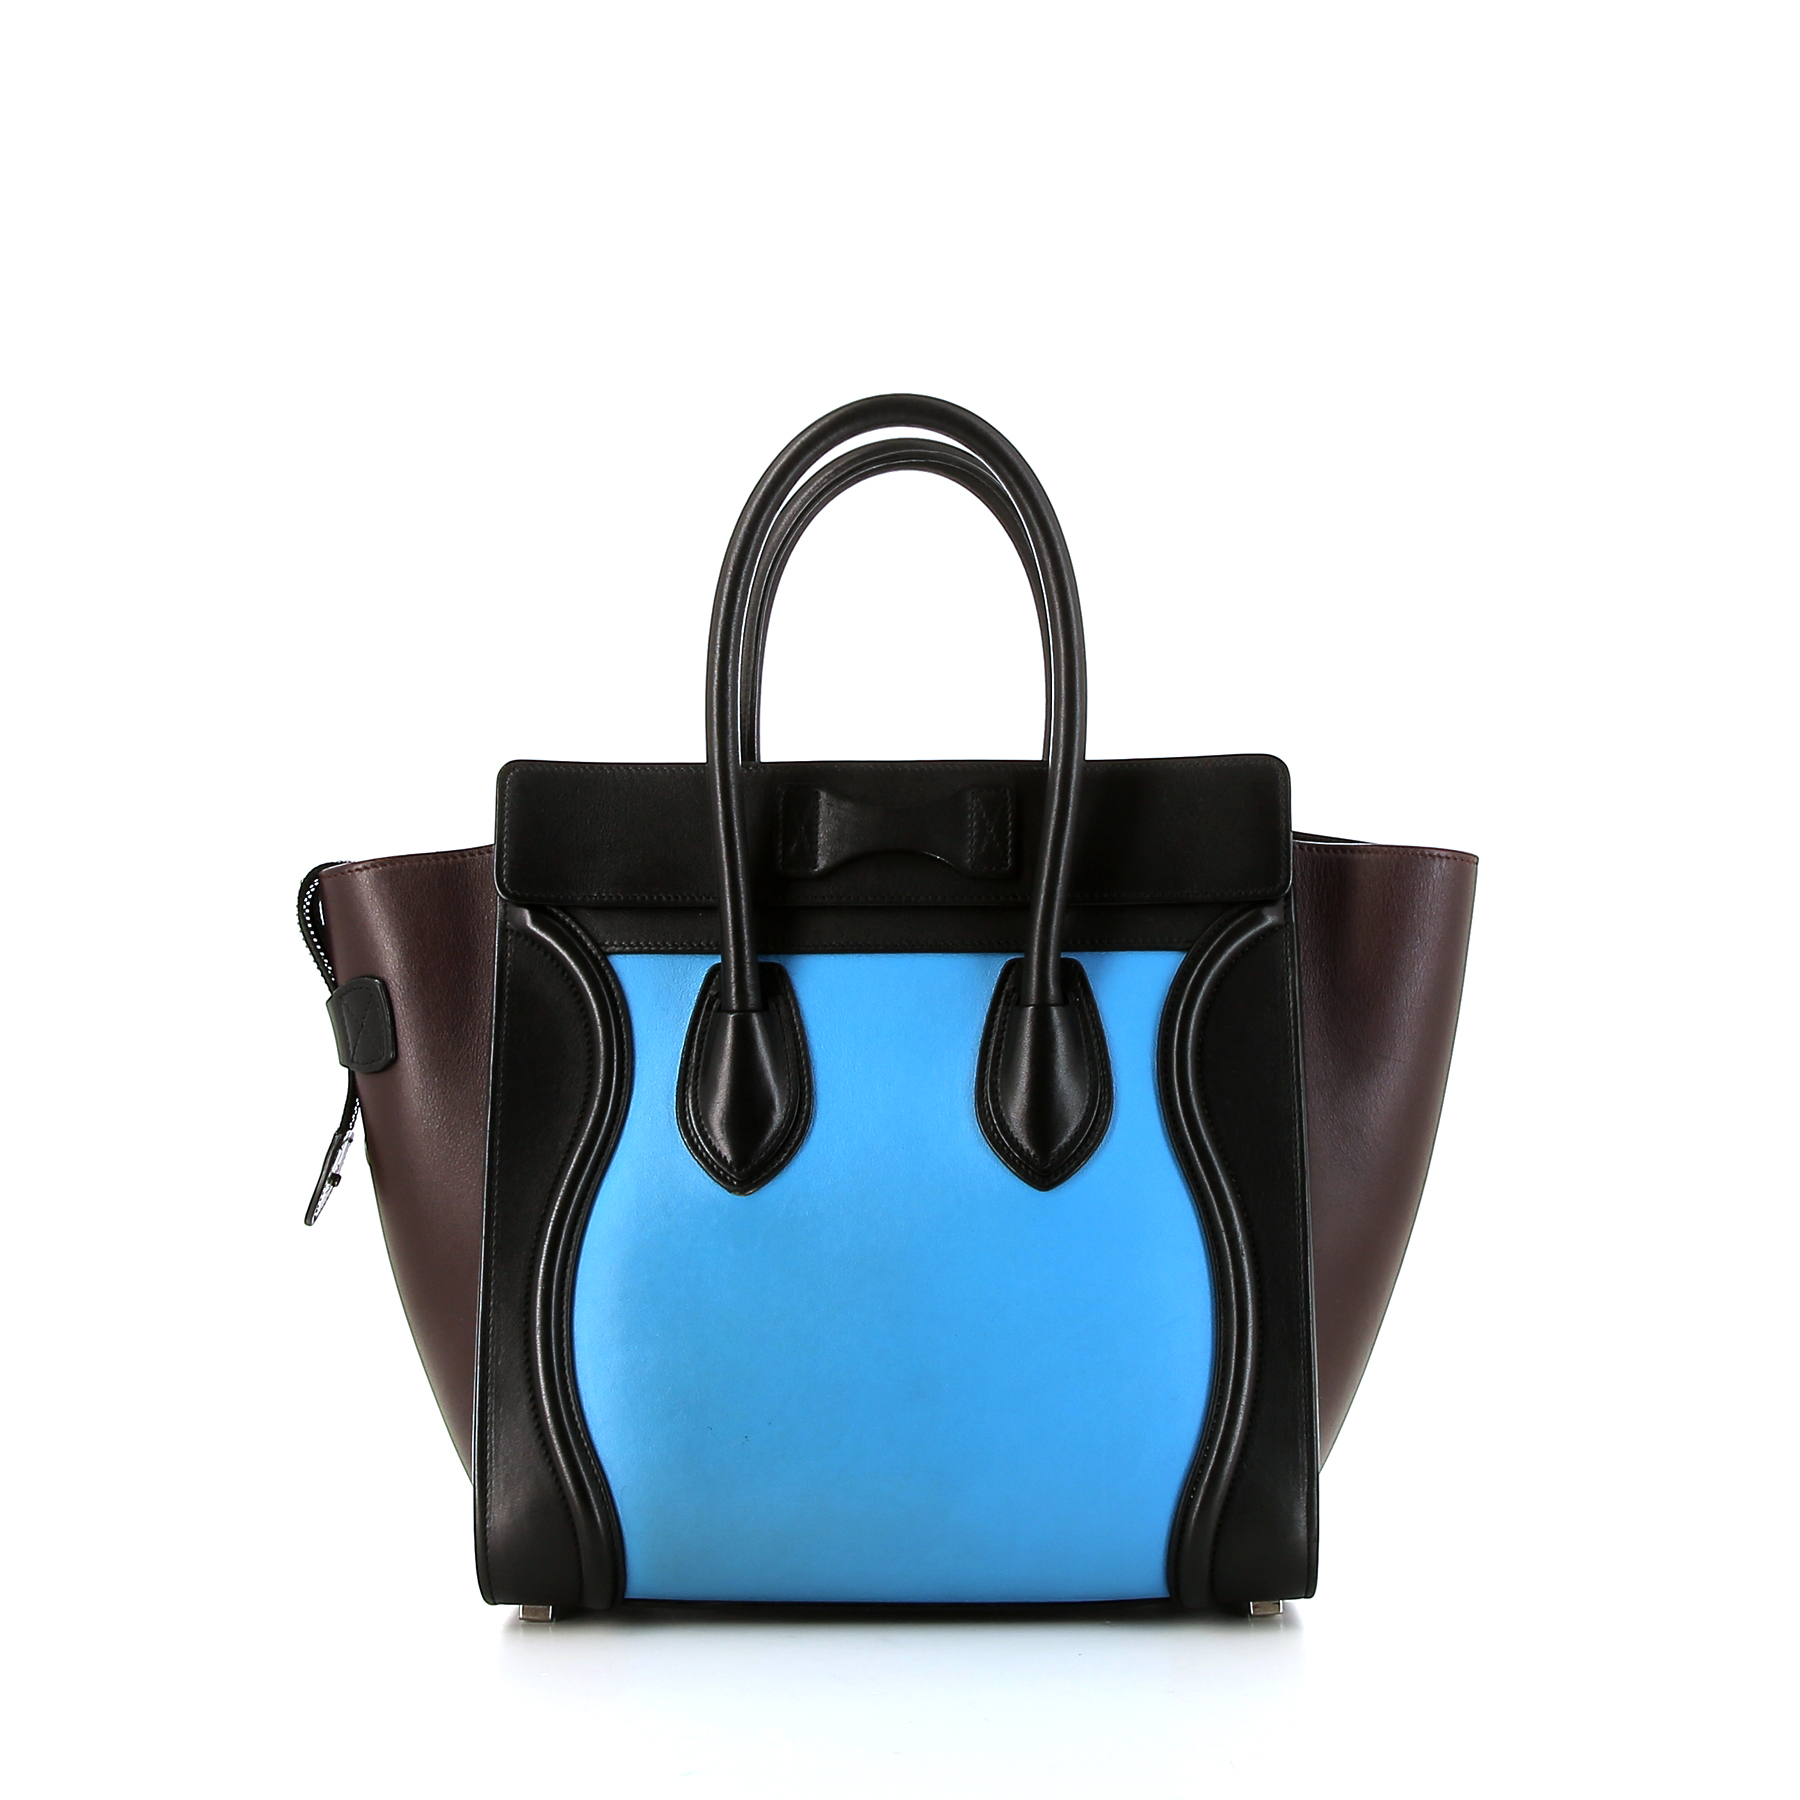 Luggage Micro Handbag In Blue, Black And Plum Tricolor Leather